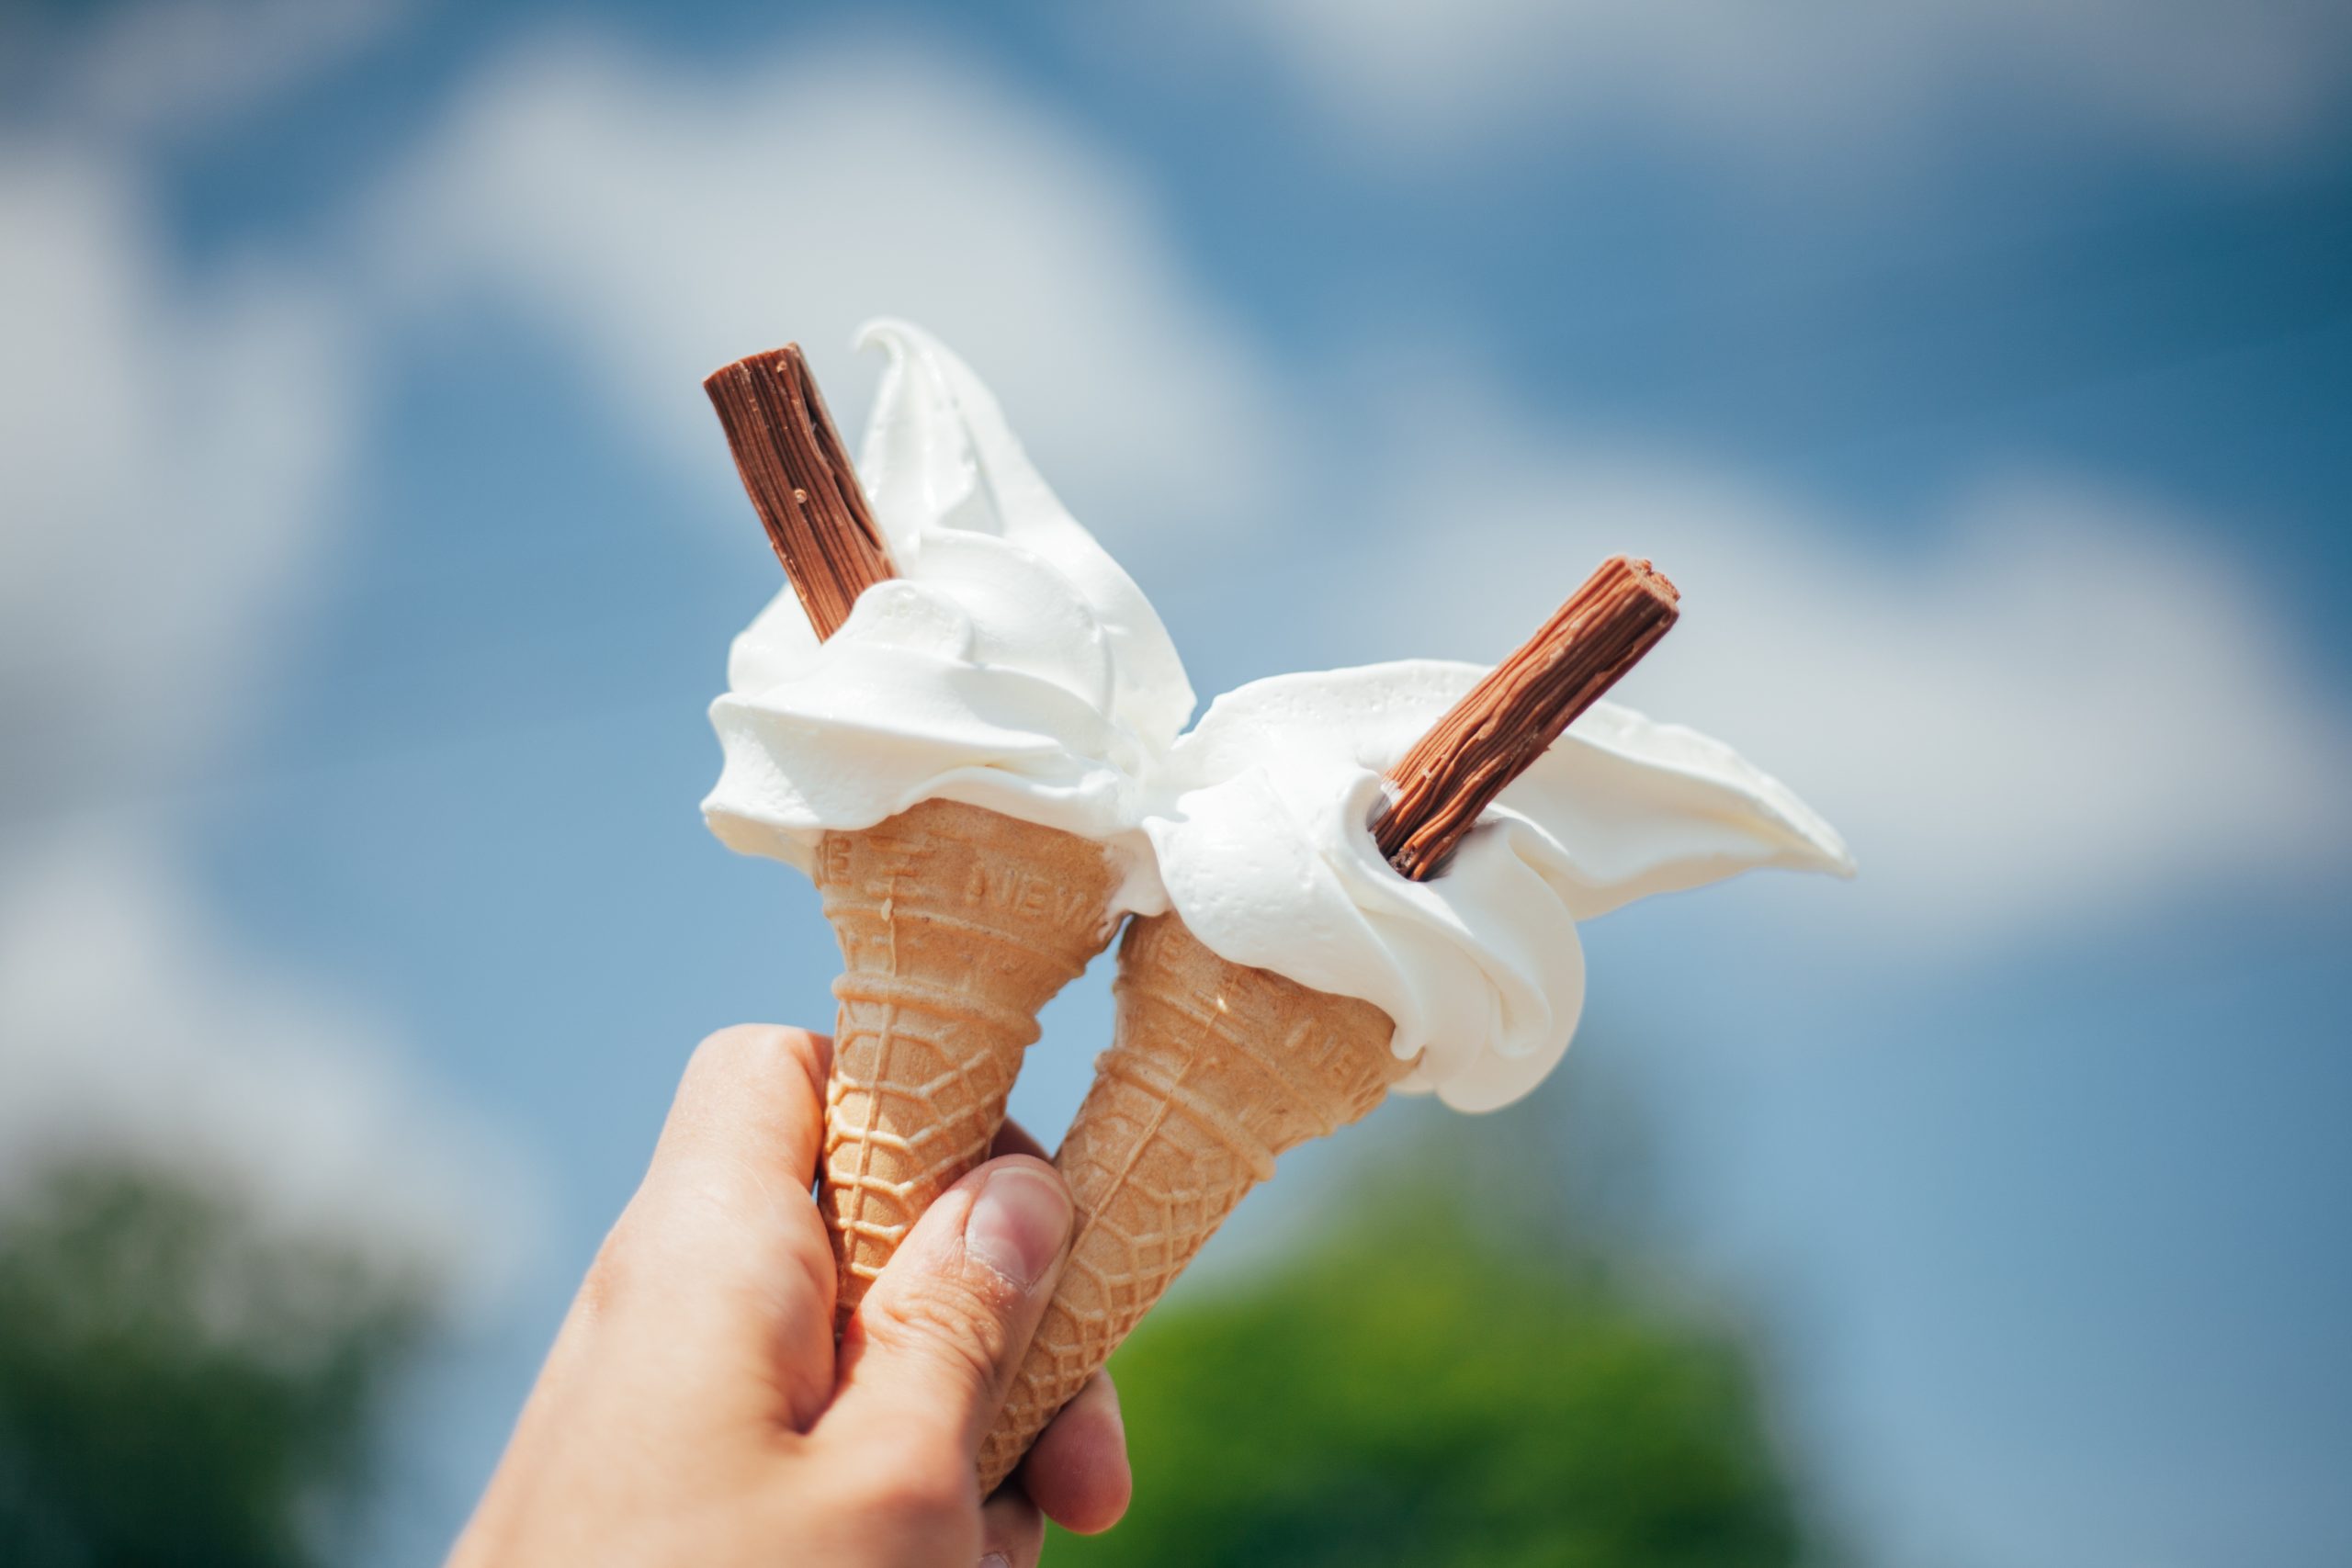 For Flake’s Sake – what’s the problem? Ice cream favourite “the ’99” jeopardised by crumbling supplies